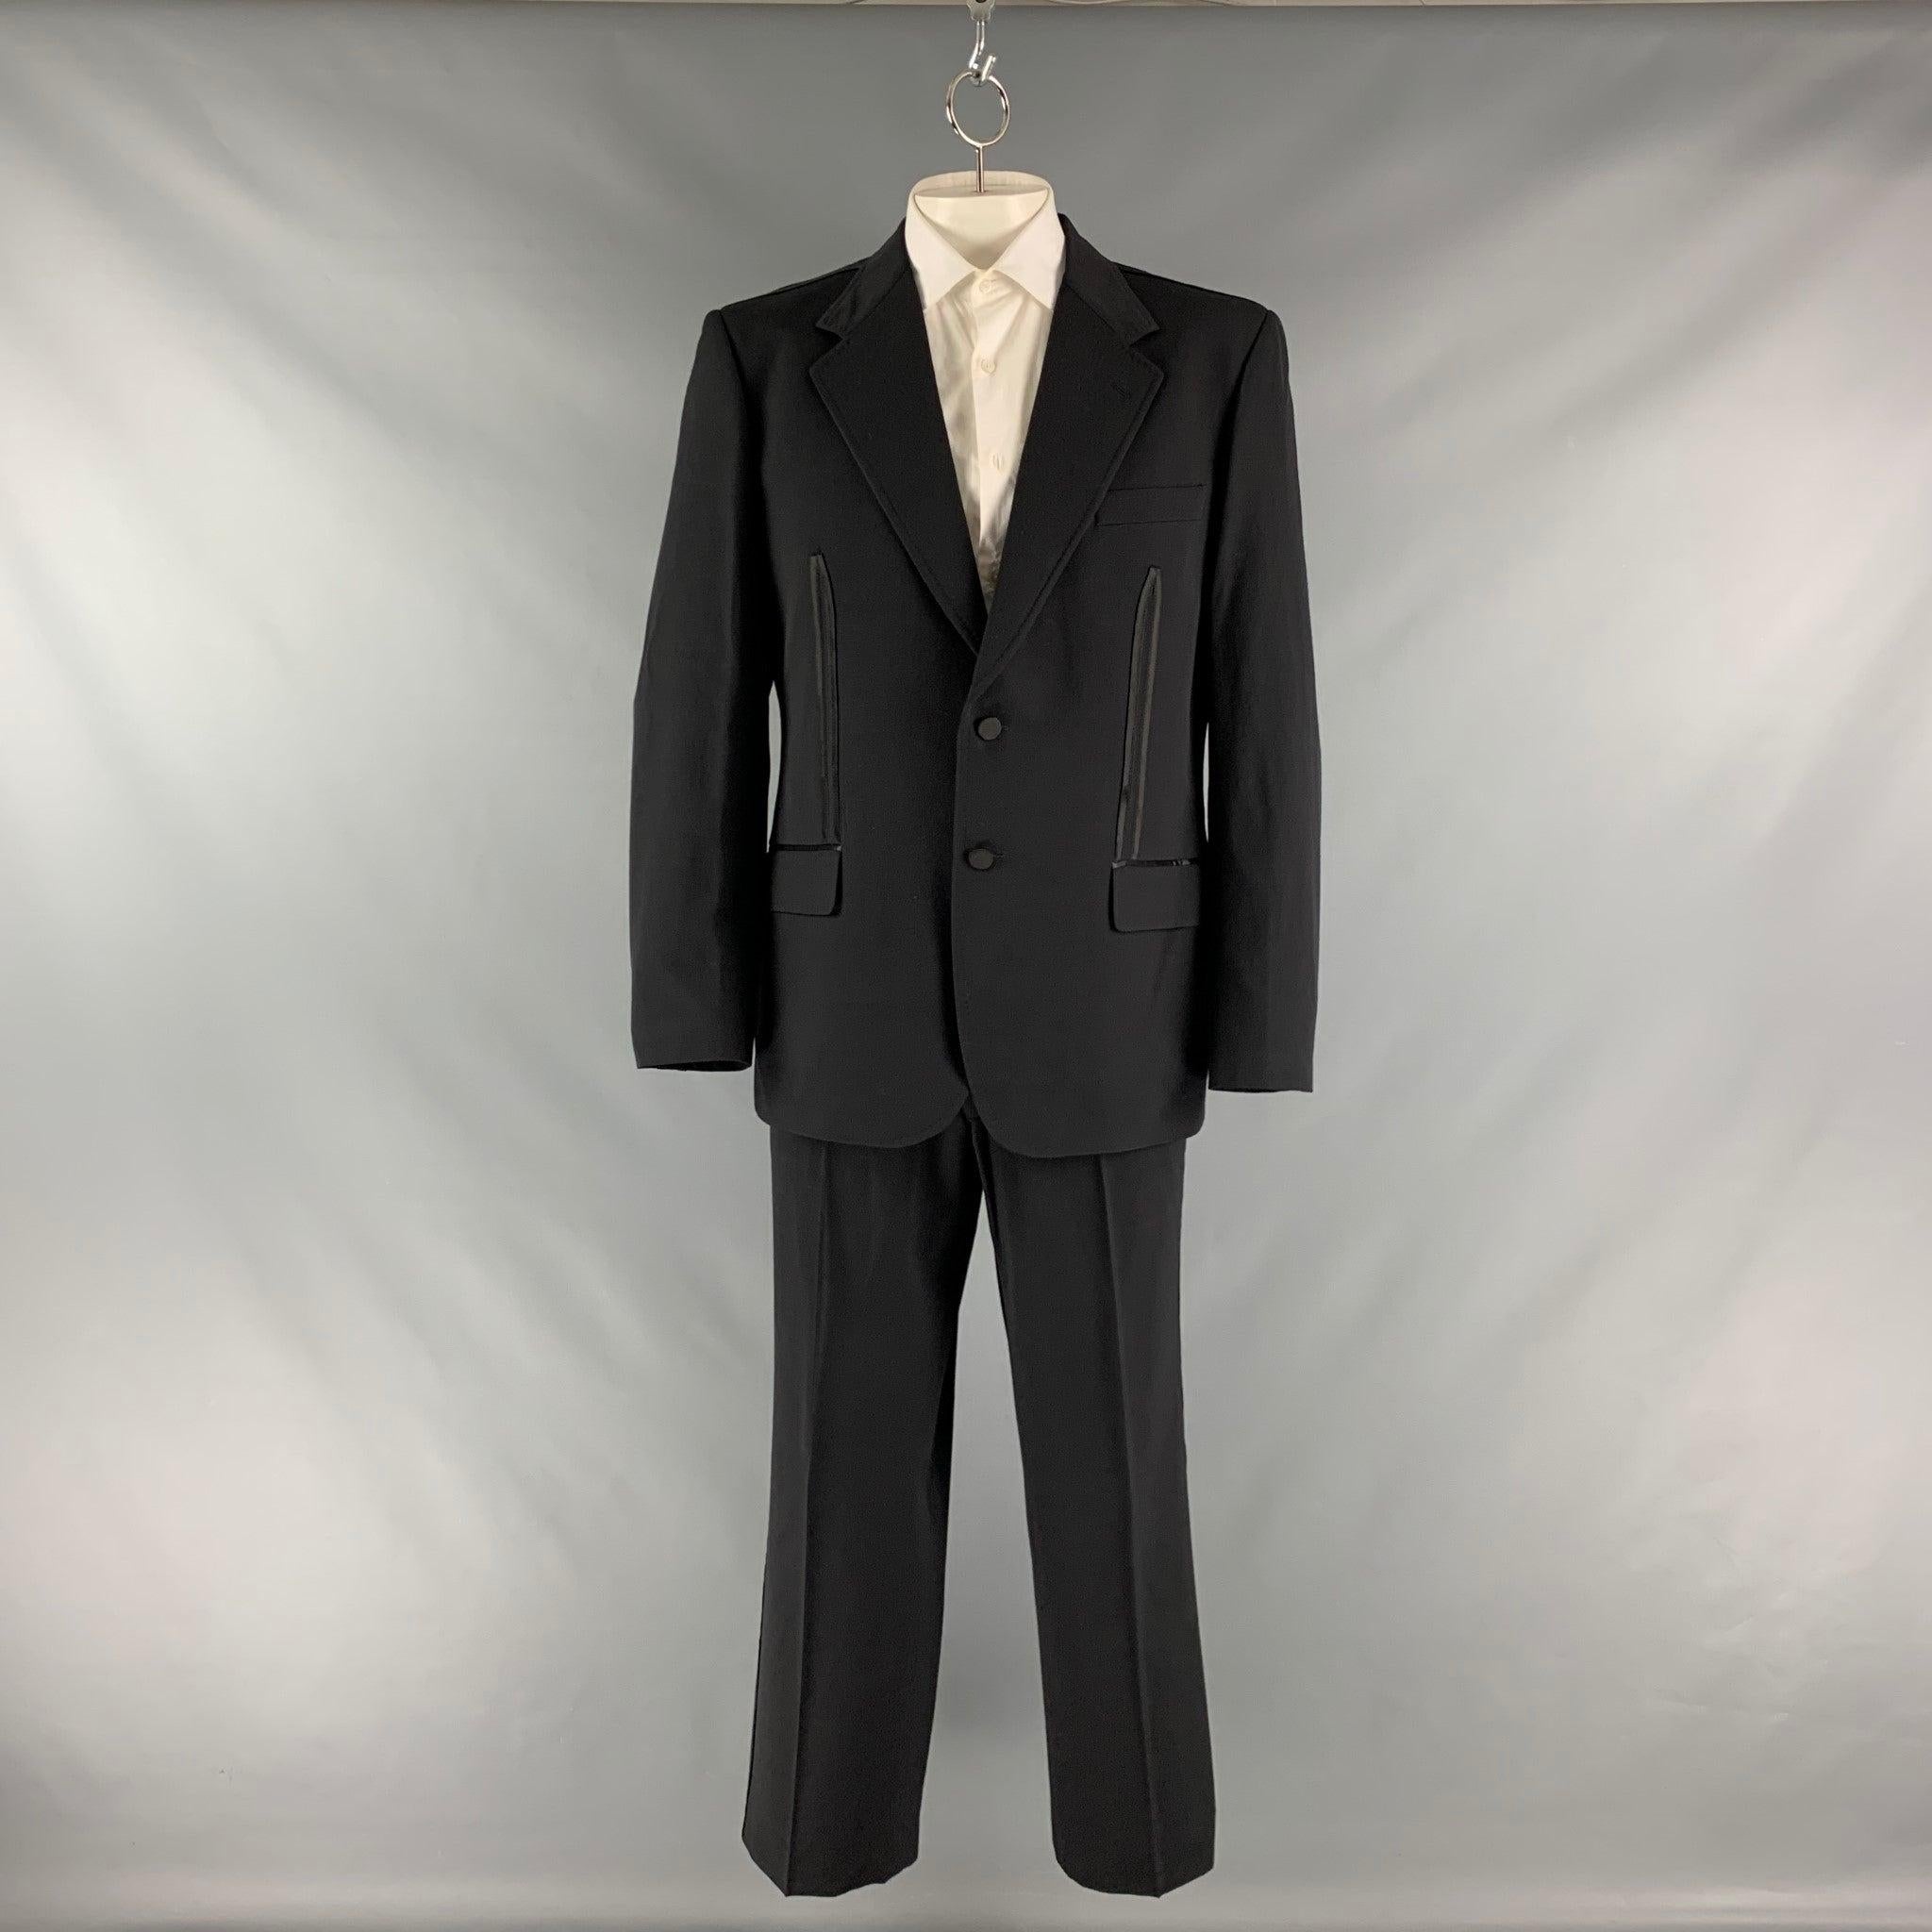 MOSCHINO tuxedo suit comes in a black polyamide blend material with a full liner and includes a single breasted, double button sport coat with a notch lapel and matching flat front trousers. Made in Italy.Very Good Pre-Owned Condition. Moderate